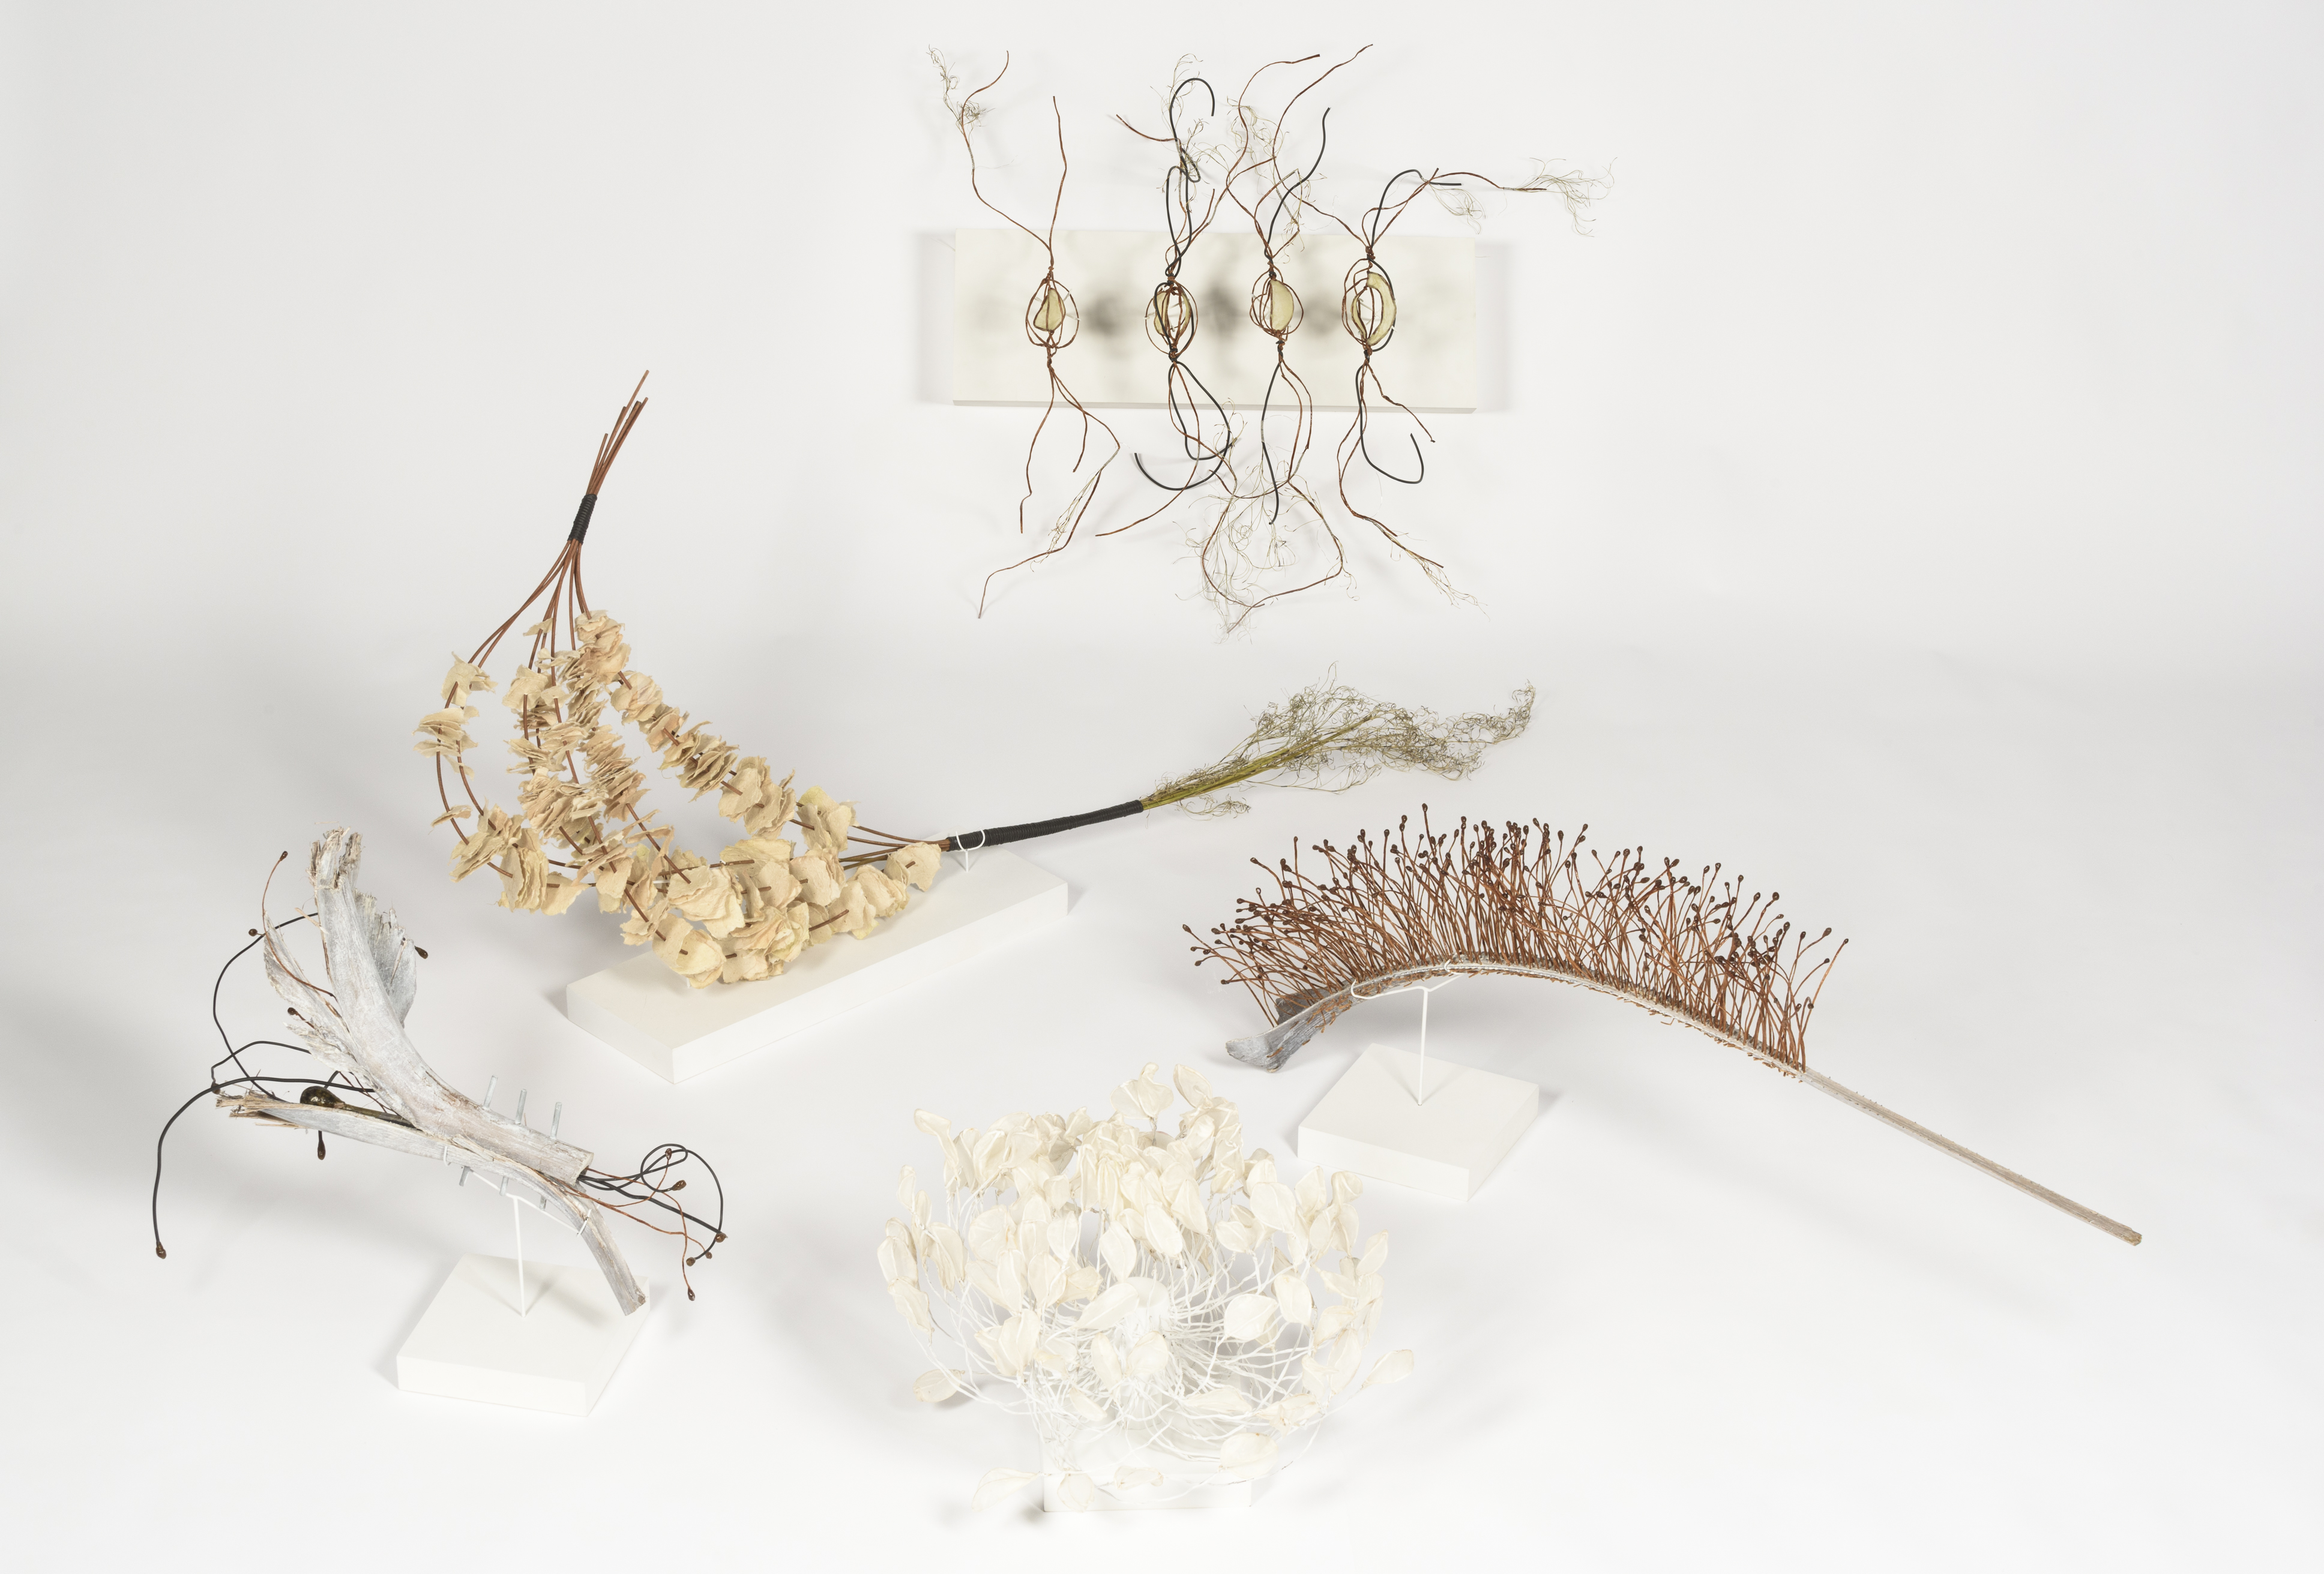 A series of five small sculptures made from found plant materials and paper that look botanical.